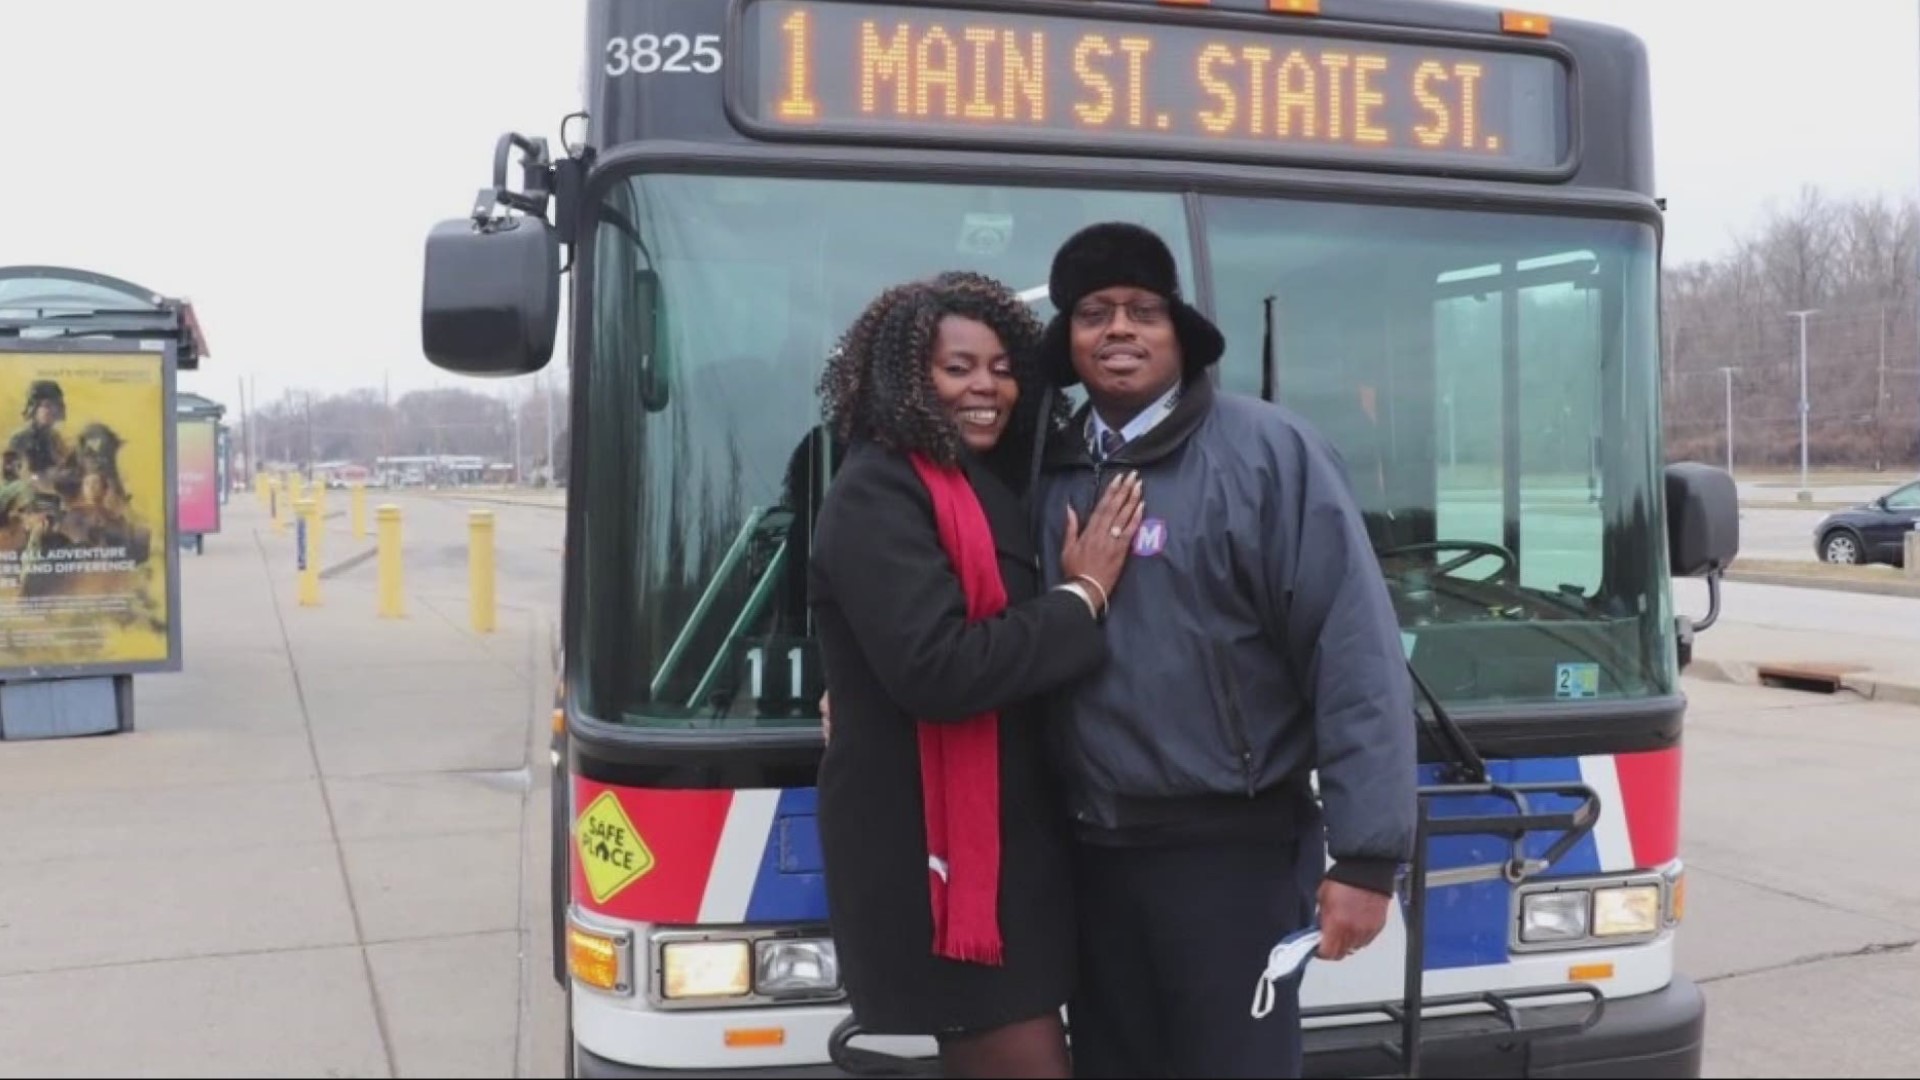 Jose Ward has driven thousands of miles as a Metrobus driver, but he made an unexpected connection when he met Lawanda